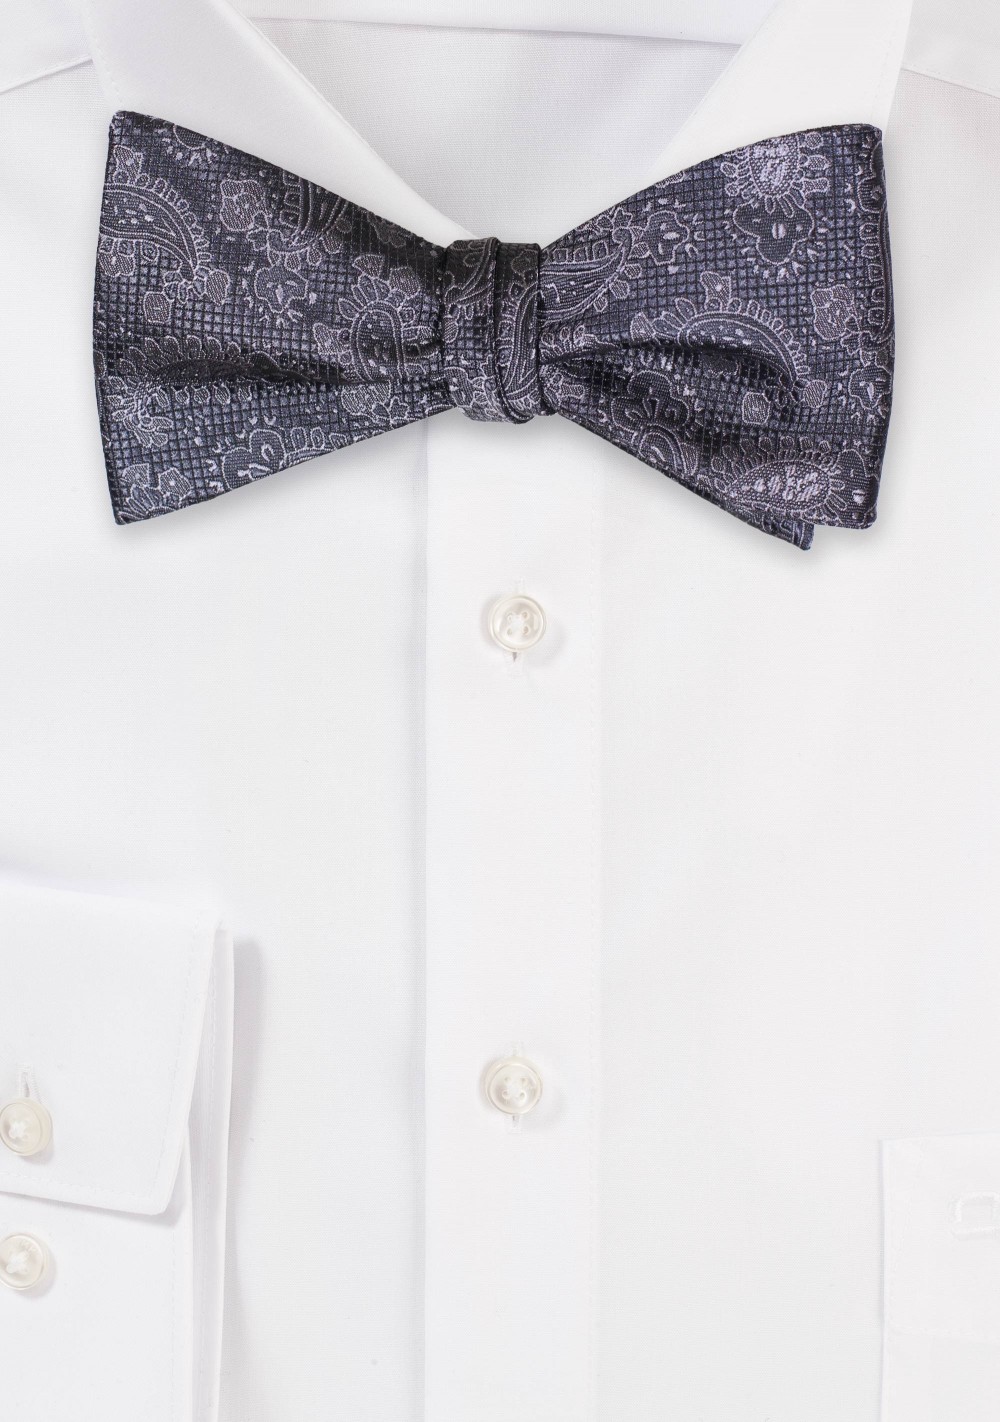 Charcoal Gray Paisley Bowtie in Self-Tie Style